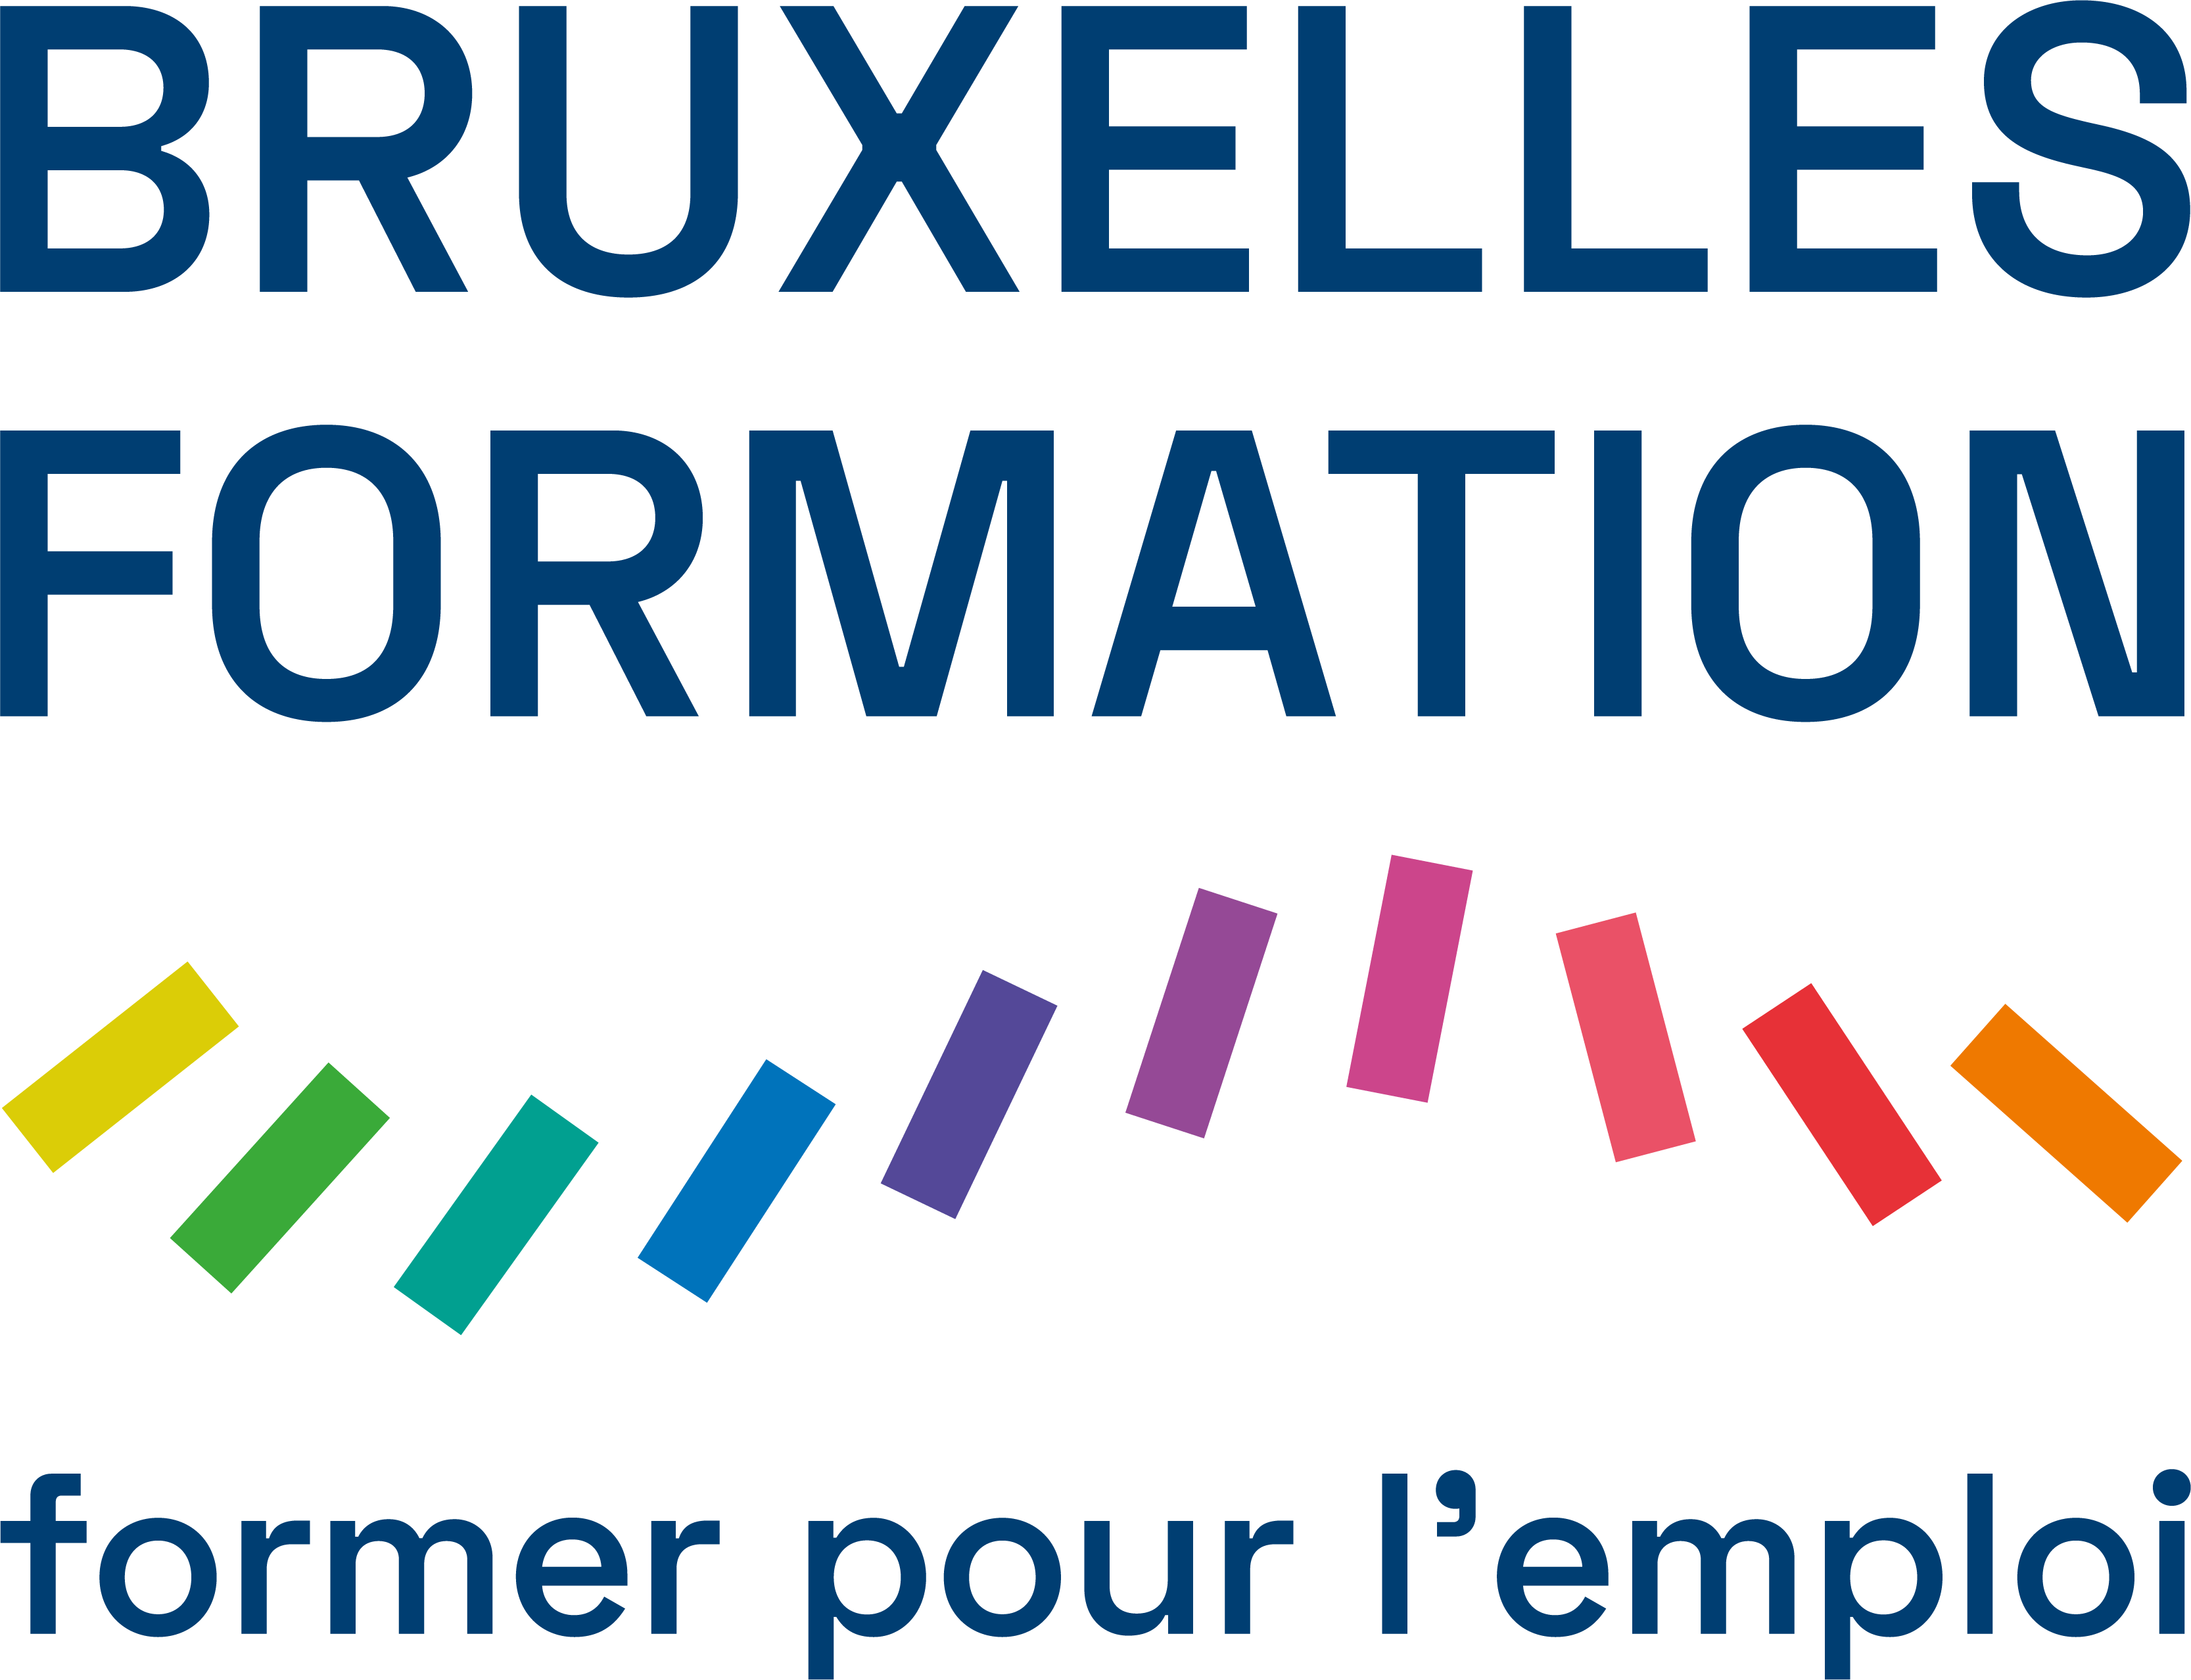 BRUXELLES FORMATION